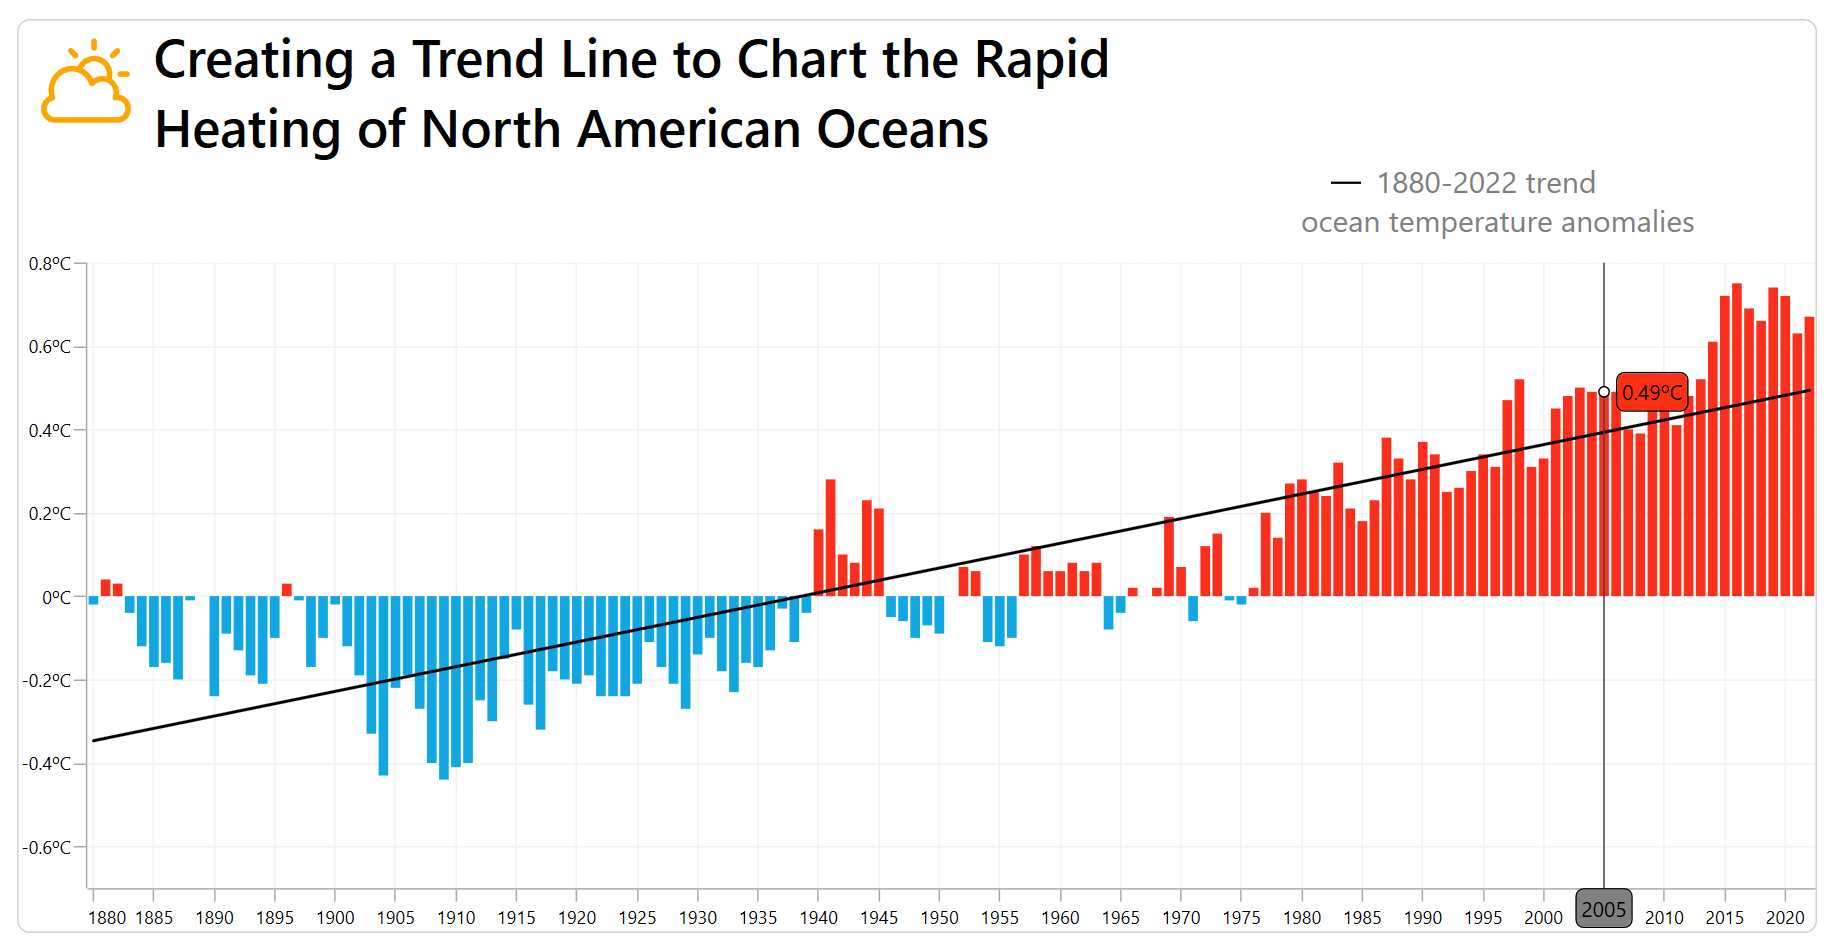 Visualizing the Rise in Temperature of North American Oceans using WPF Charts